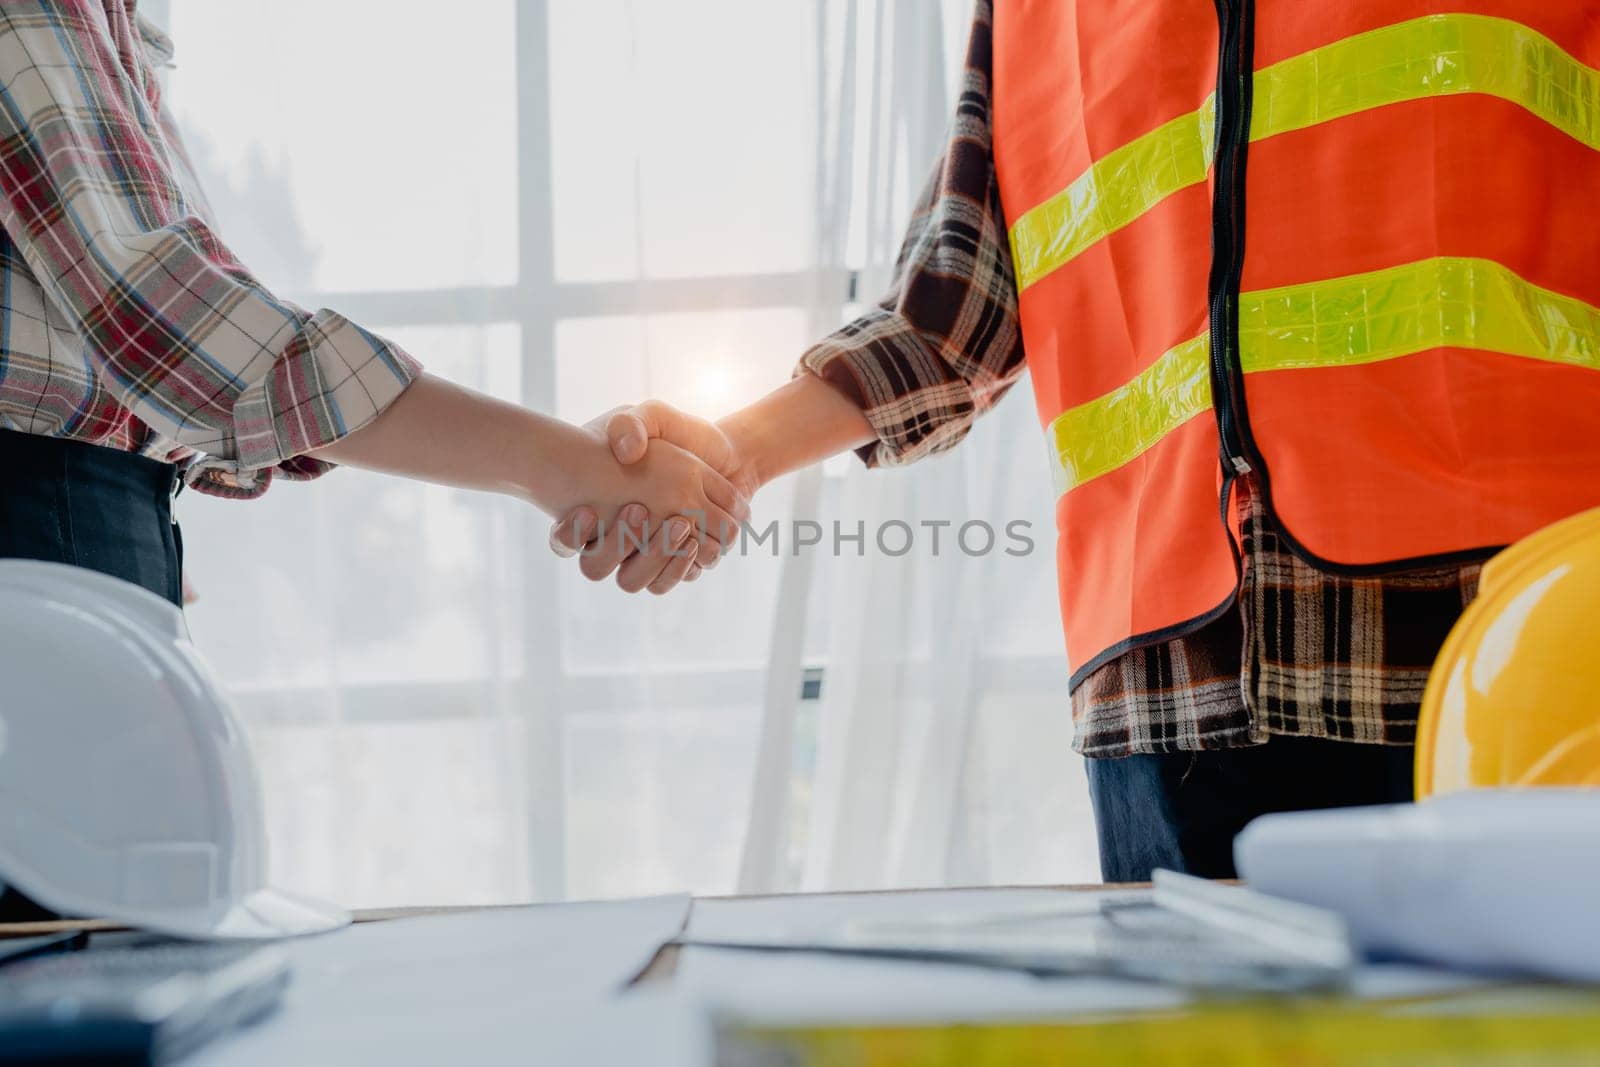 Engineers, designers and interior designers are handshake shack hands deal finalizing the design of interiors by discussing selecting materials and colors to design rooms to present to clients. by Manastrong